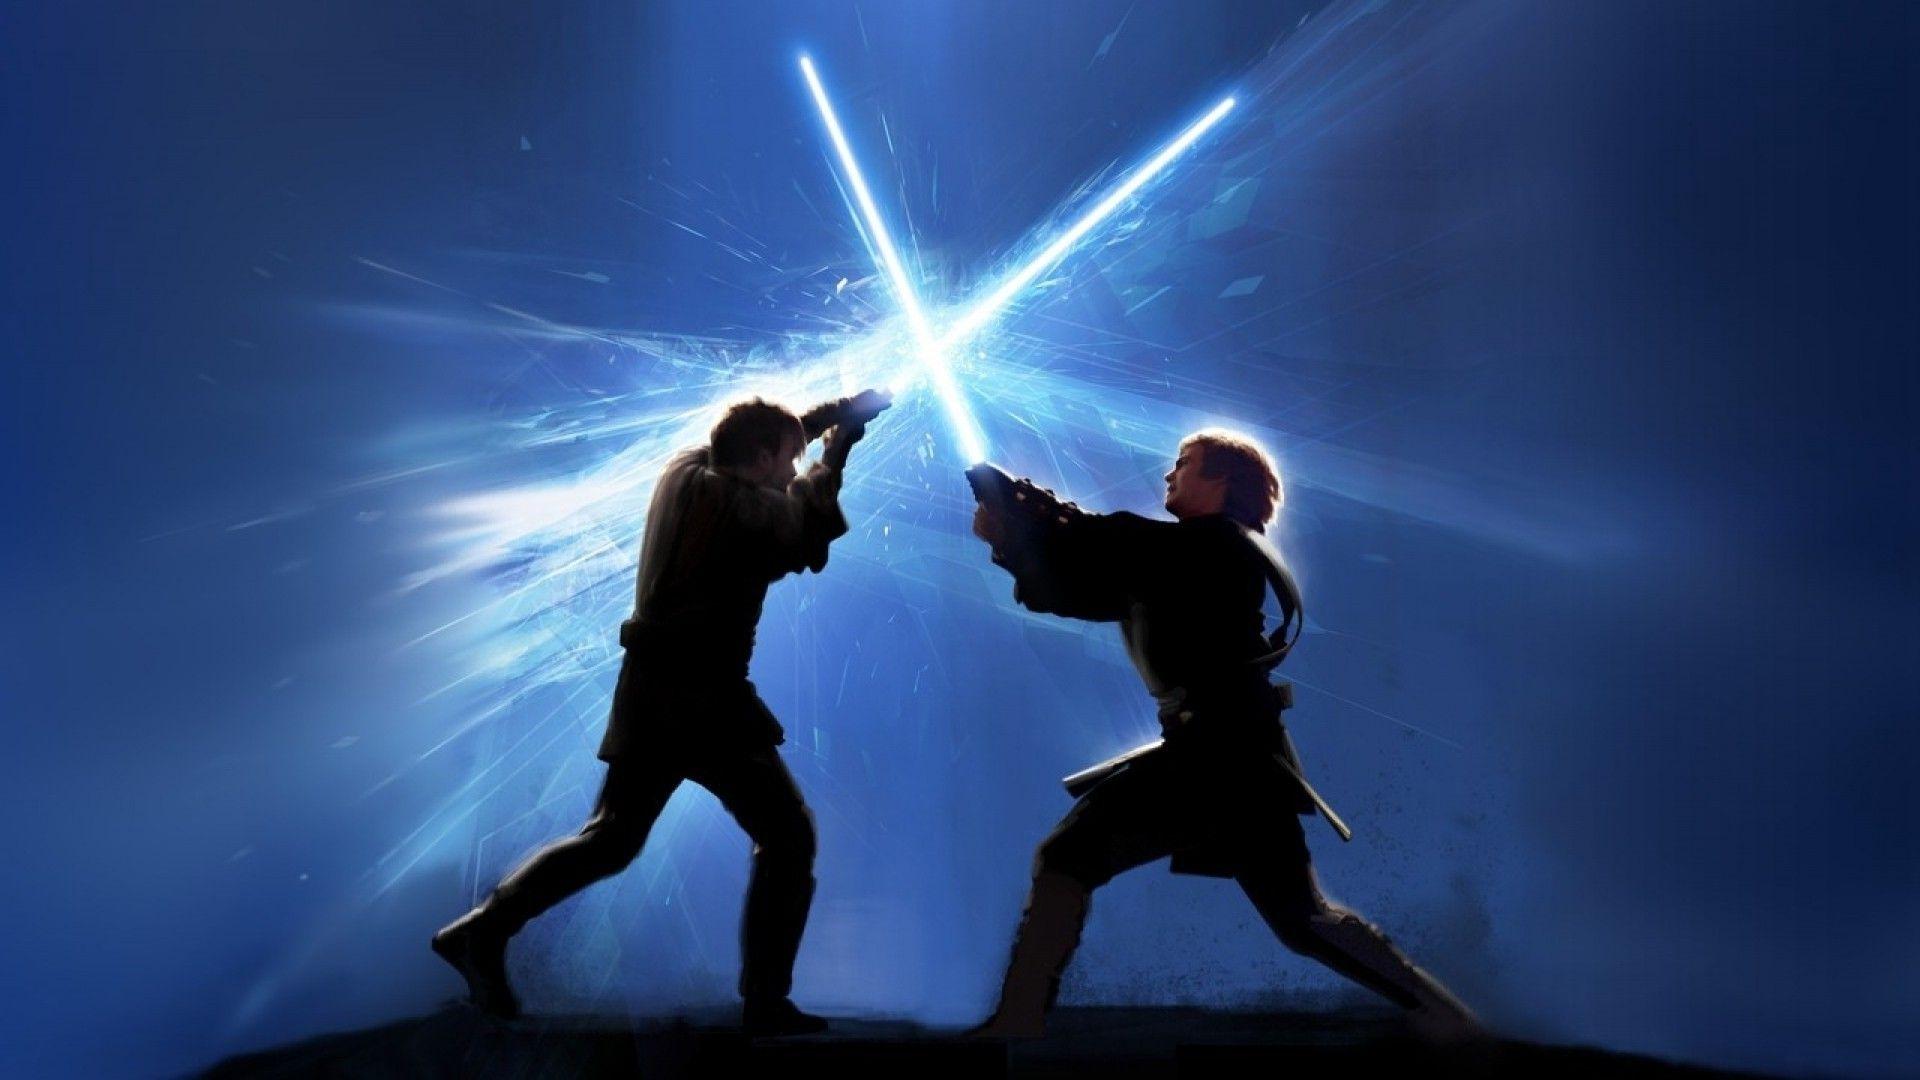 star wars star wars episode iii the revenge of the sith wallpaper